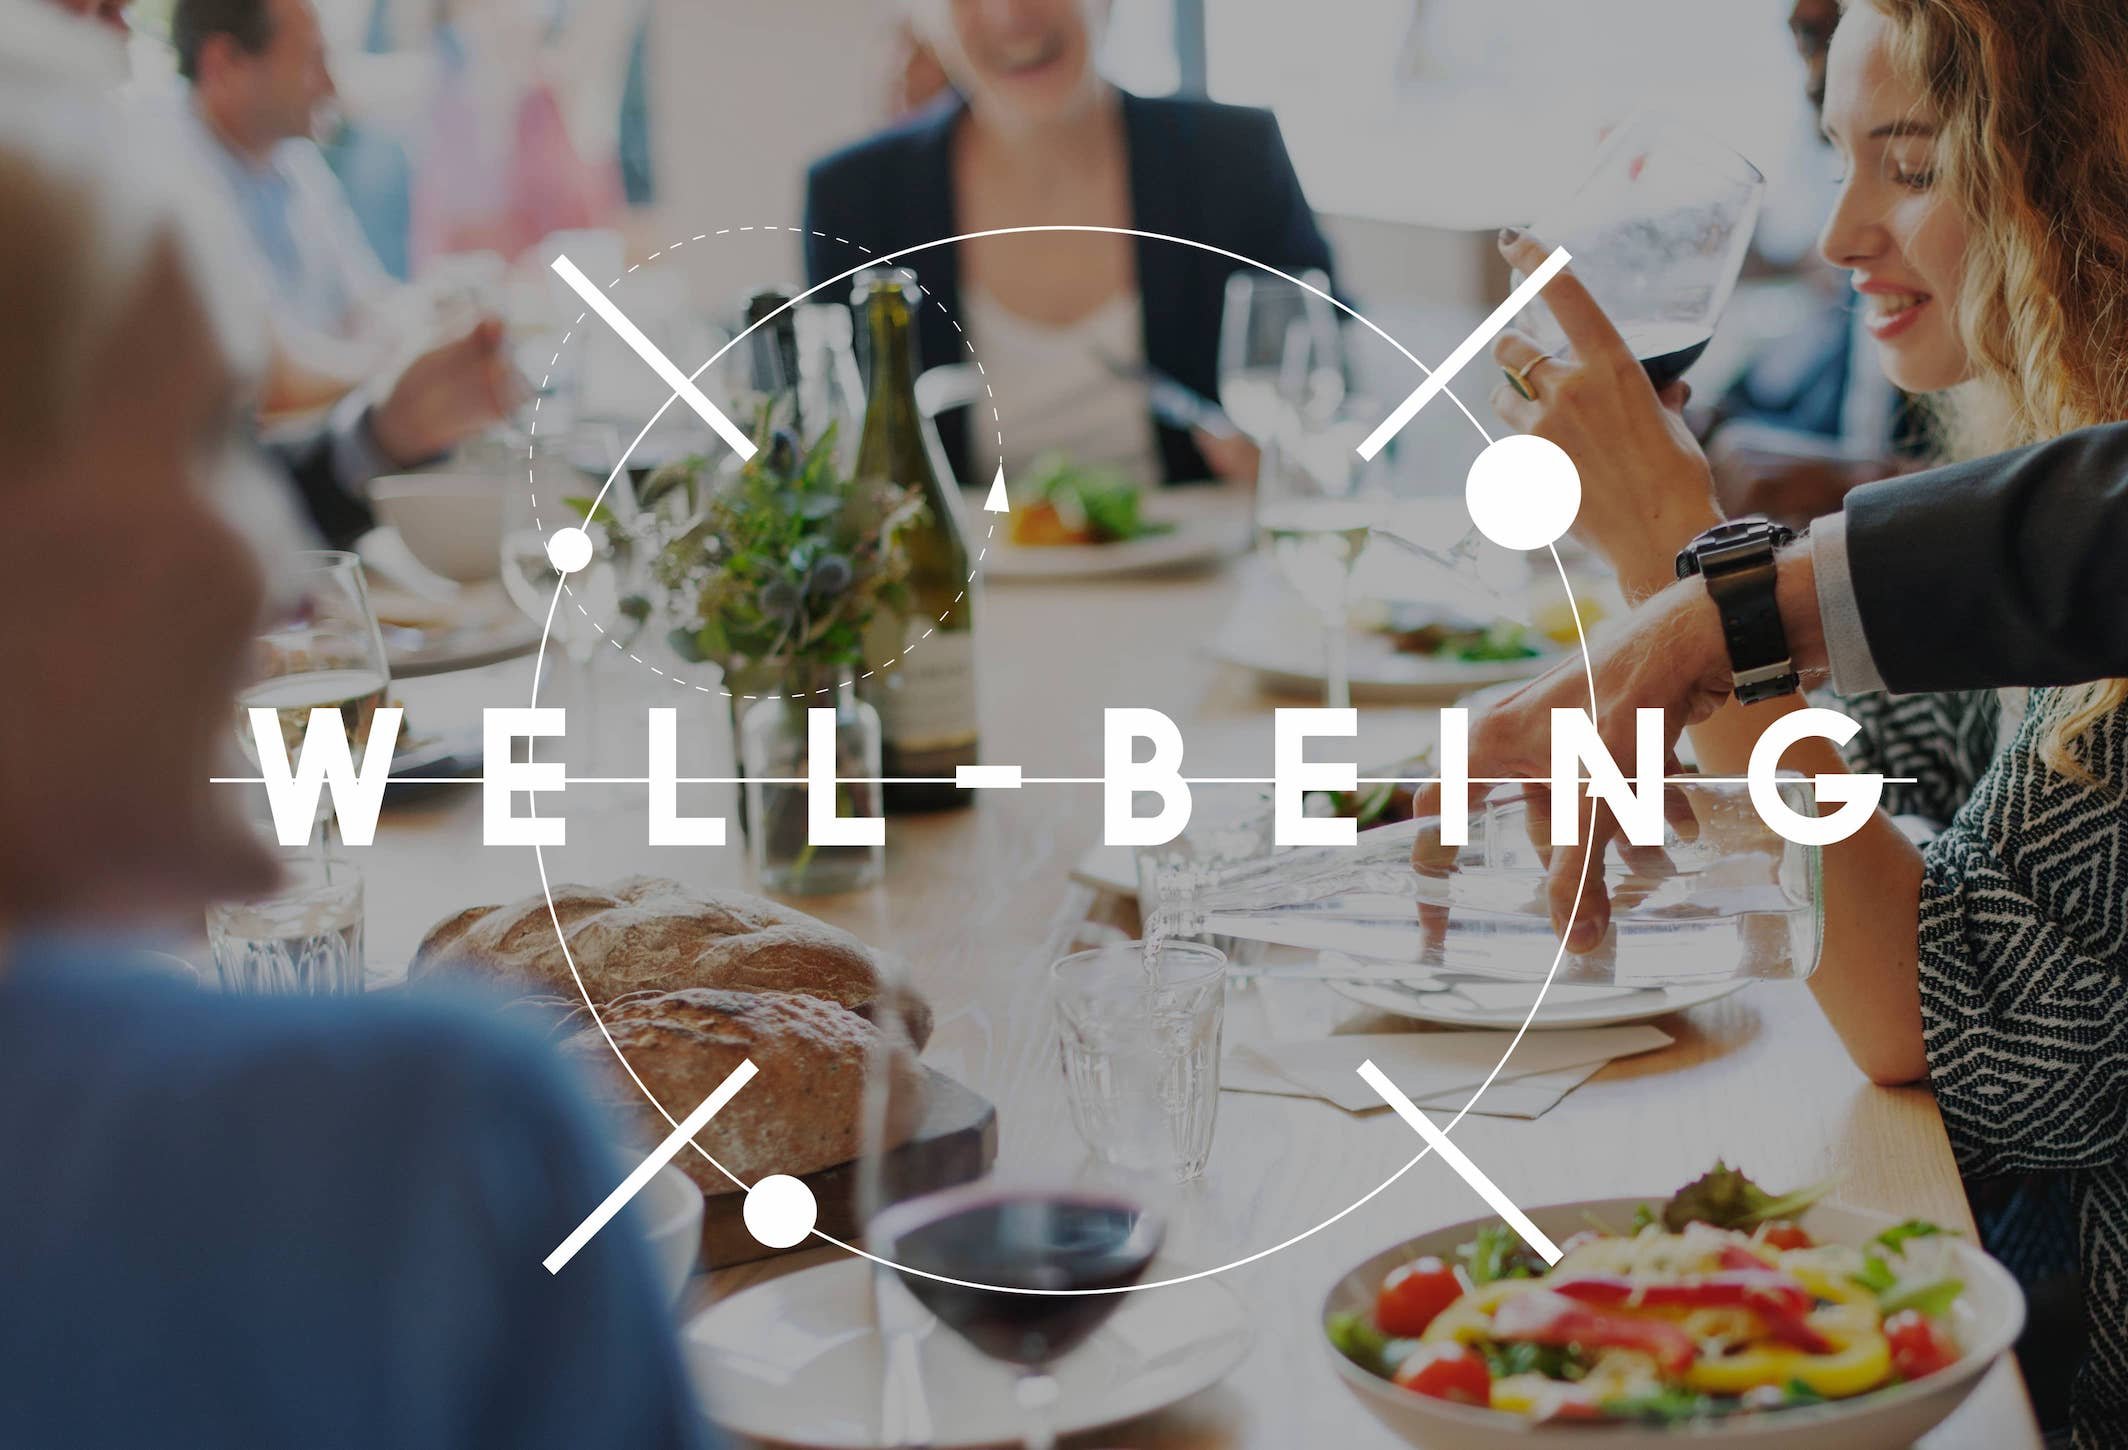 A table full of healthy food and loving friends and family_the essence of Ayurveda is balance and well-being.